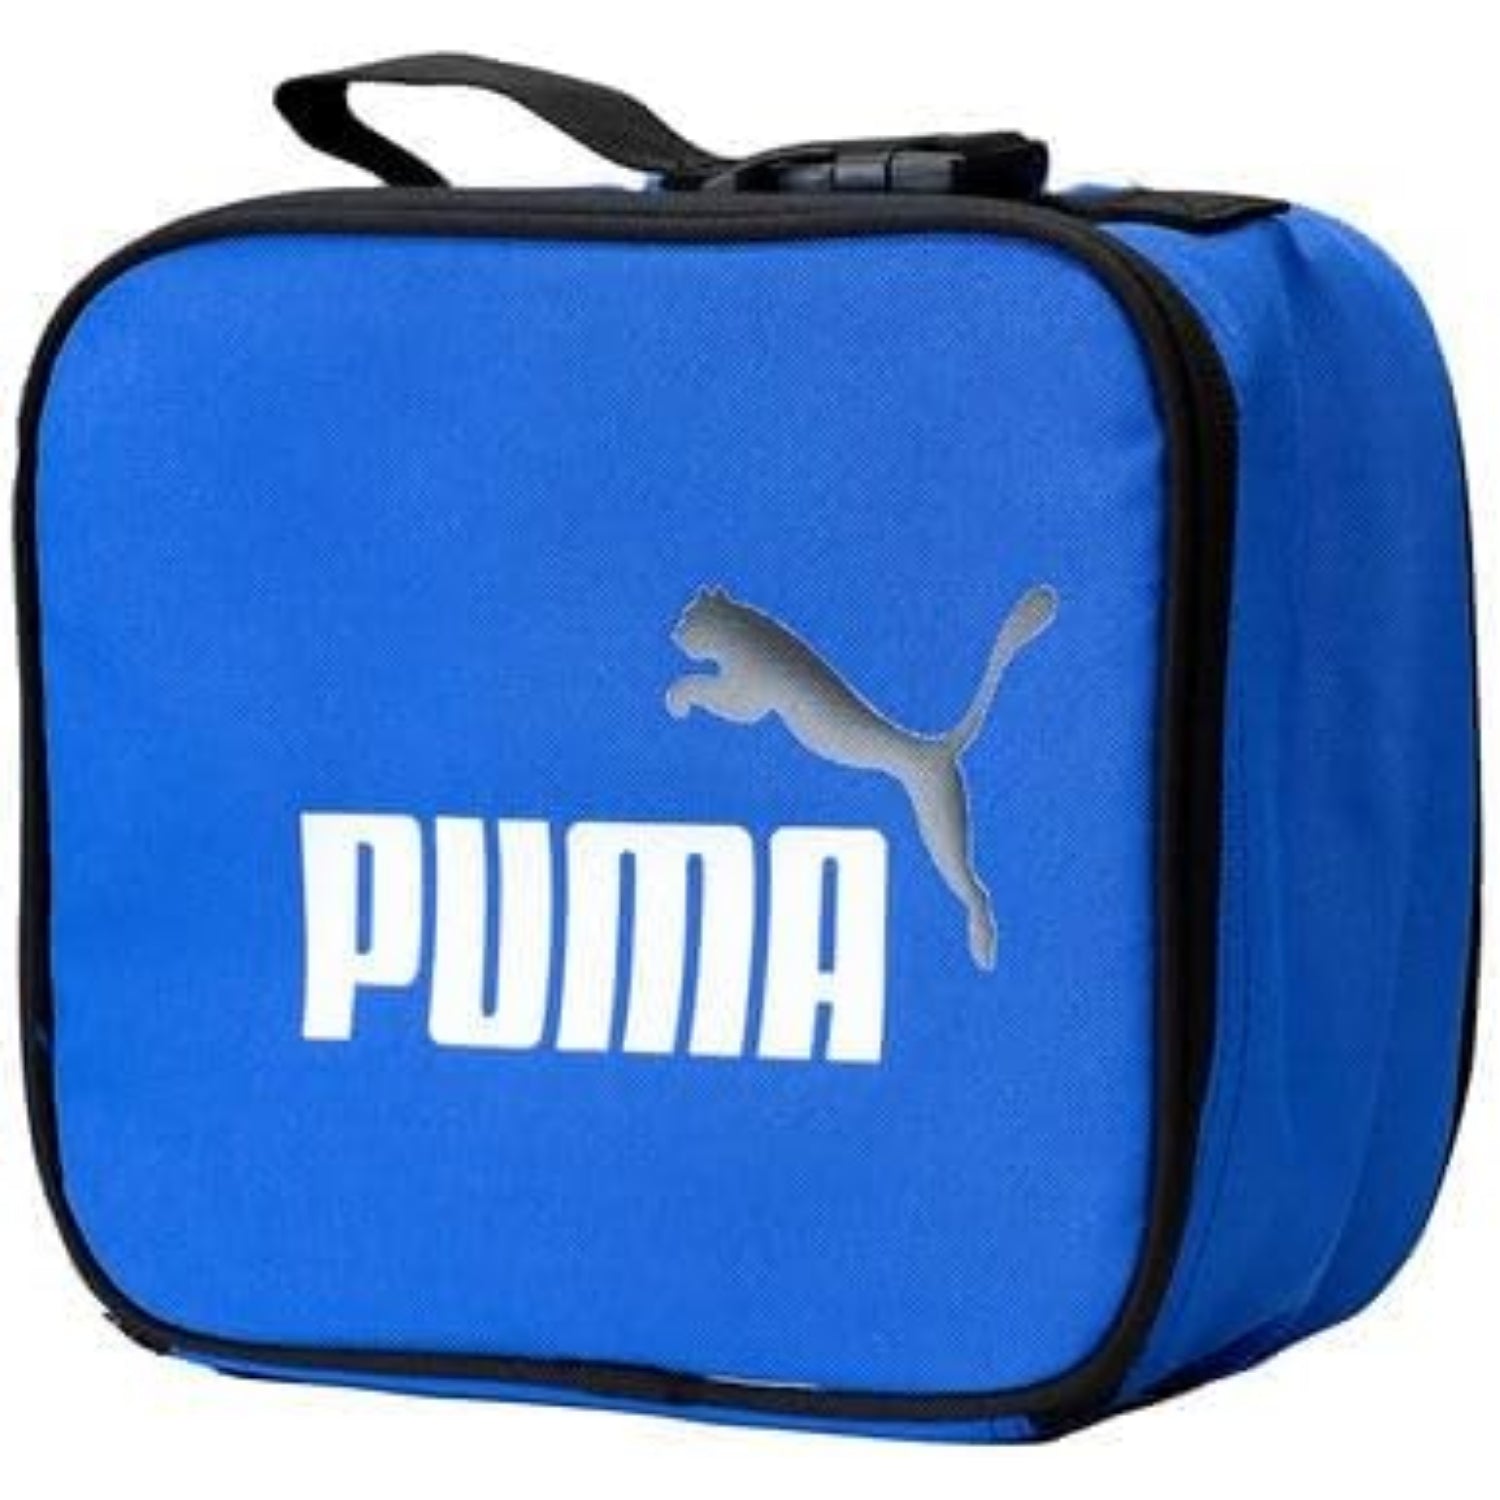 Puma Evercat Lunch Box with Carry Handle